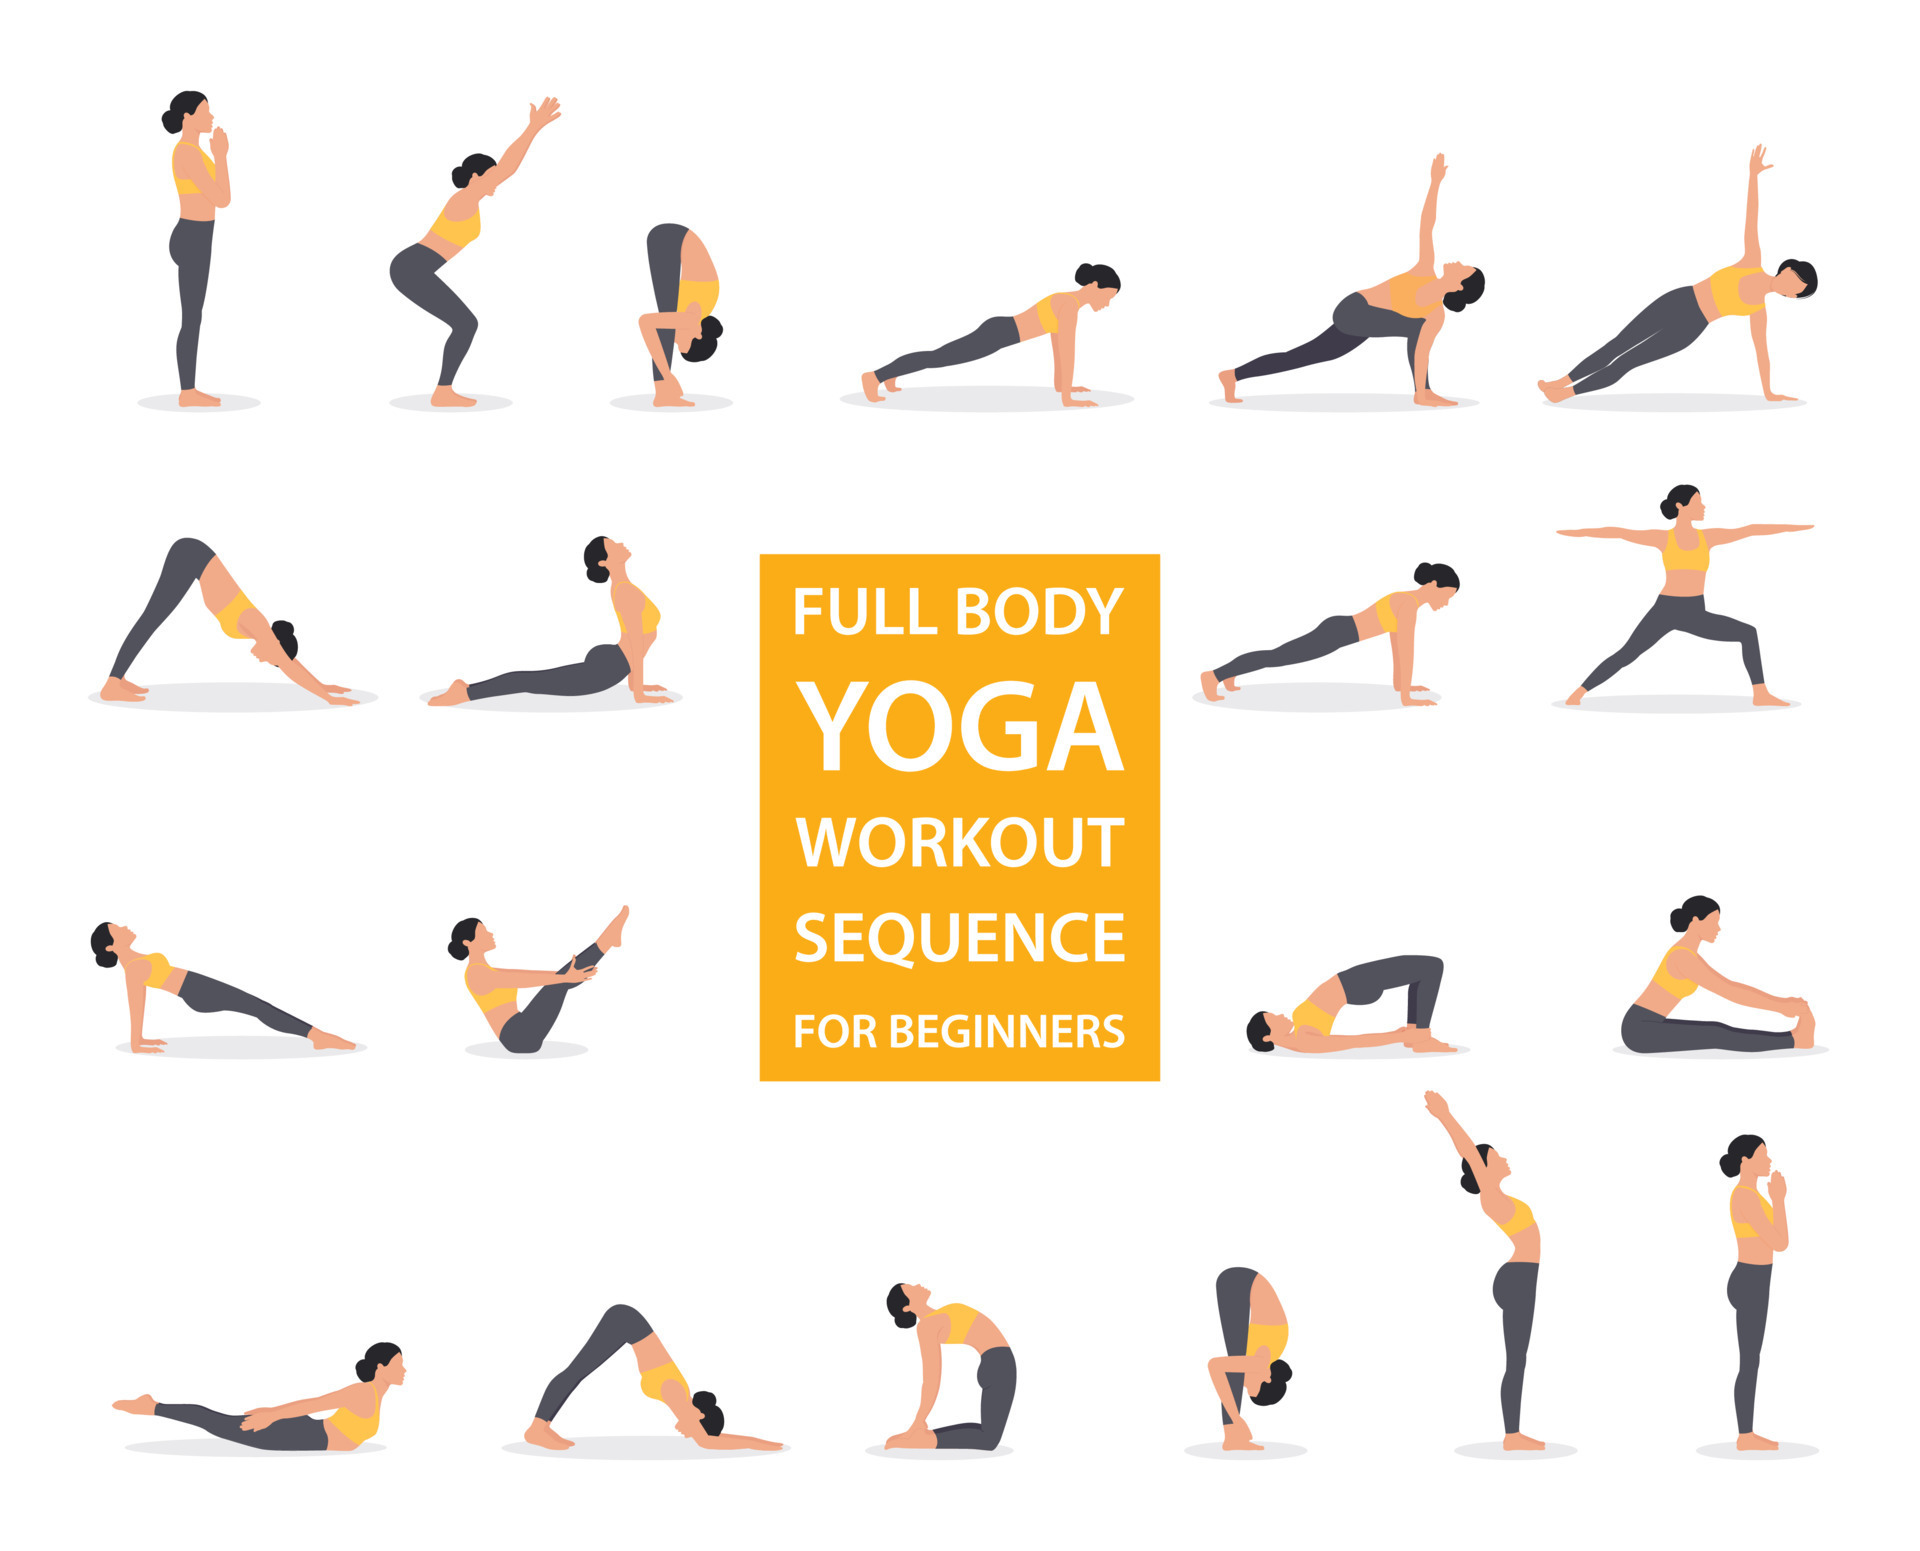 https://static.vecteezy.com/system/resources/previews/013/444/411/original/woman-yoga-full-body-workout-isolated-on-the-white-background-yoga-sequence-for-beginners-fitness-aerobic-and-pilates-set-illustration-vector.jpg